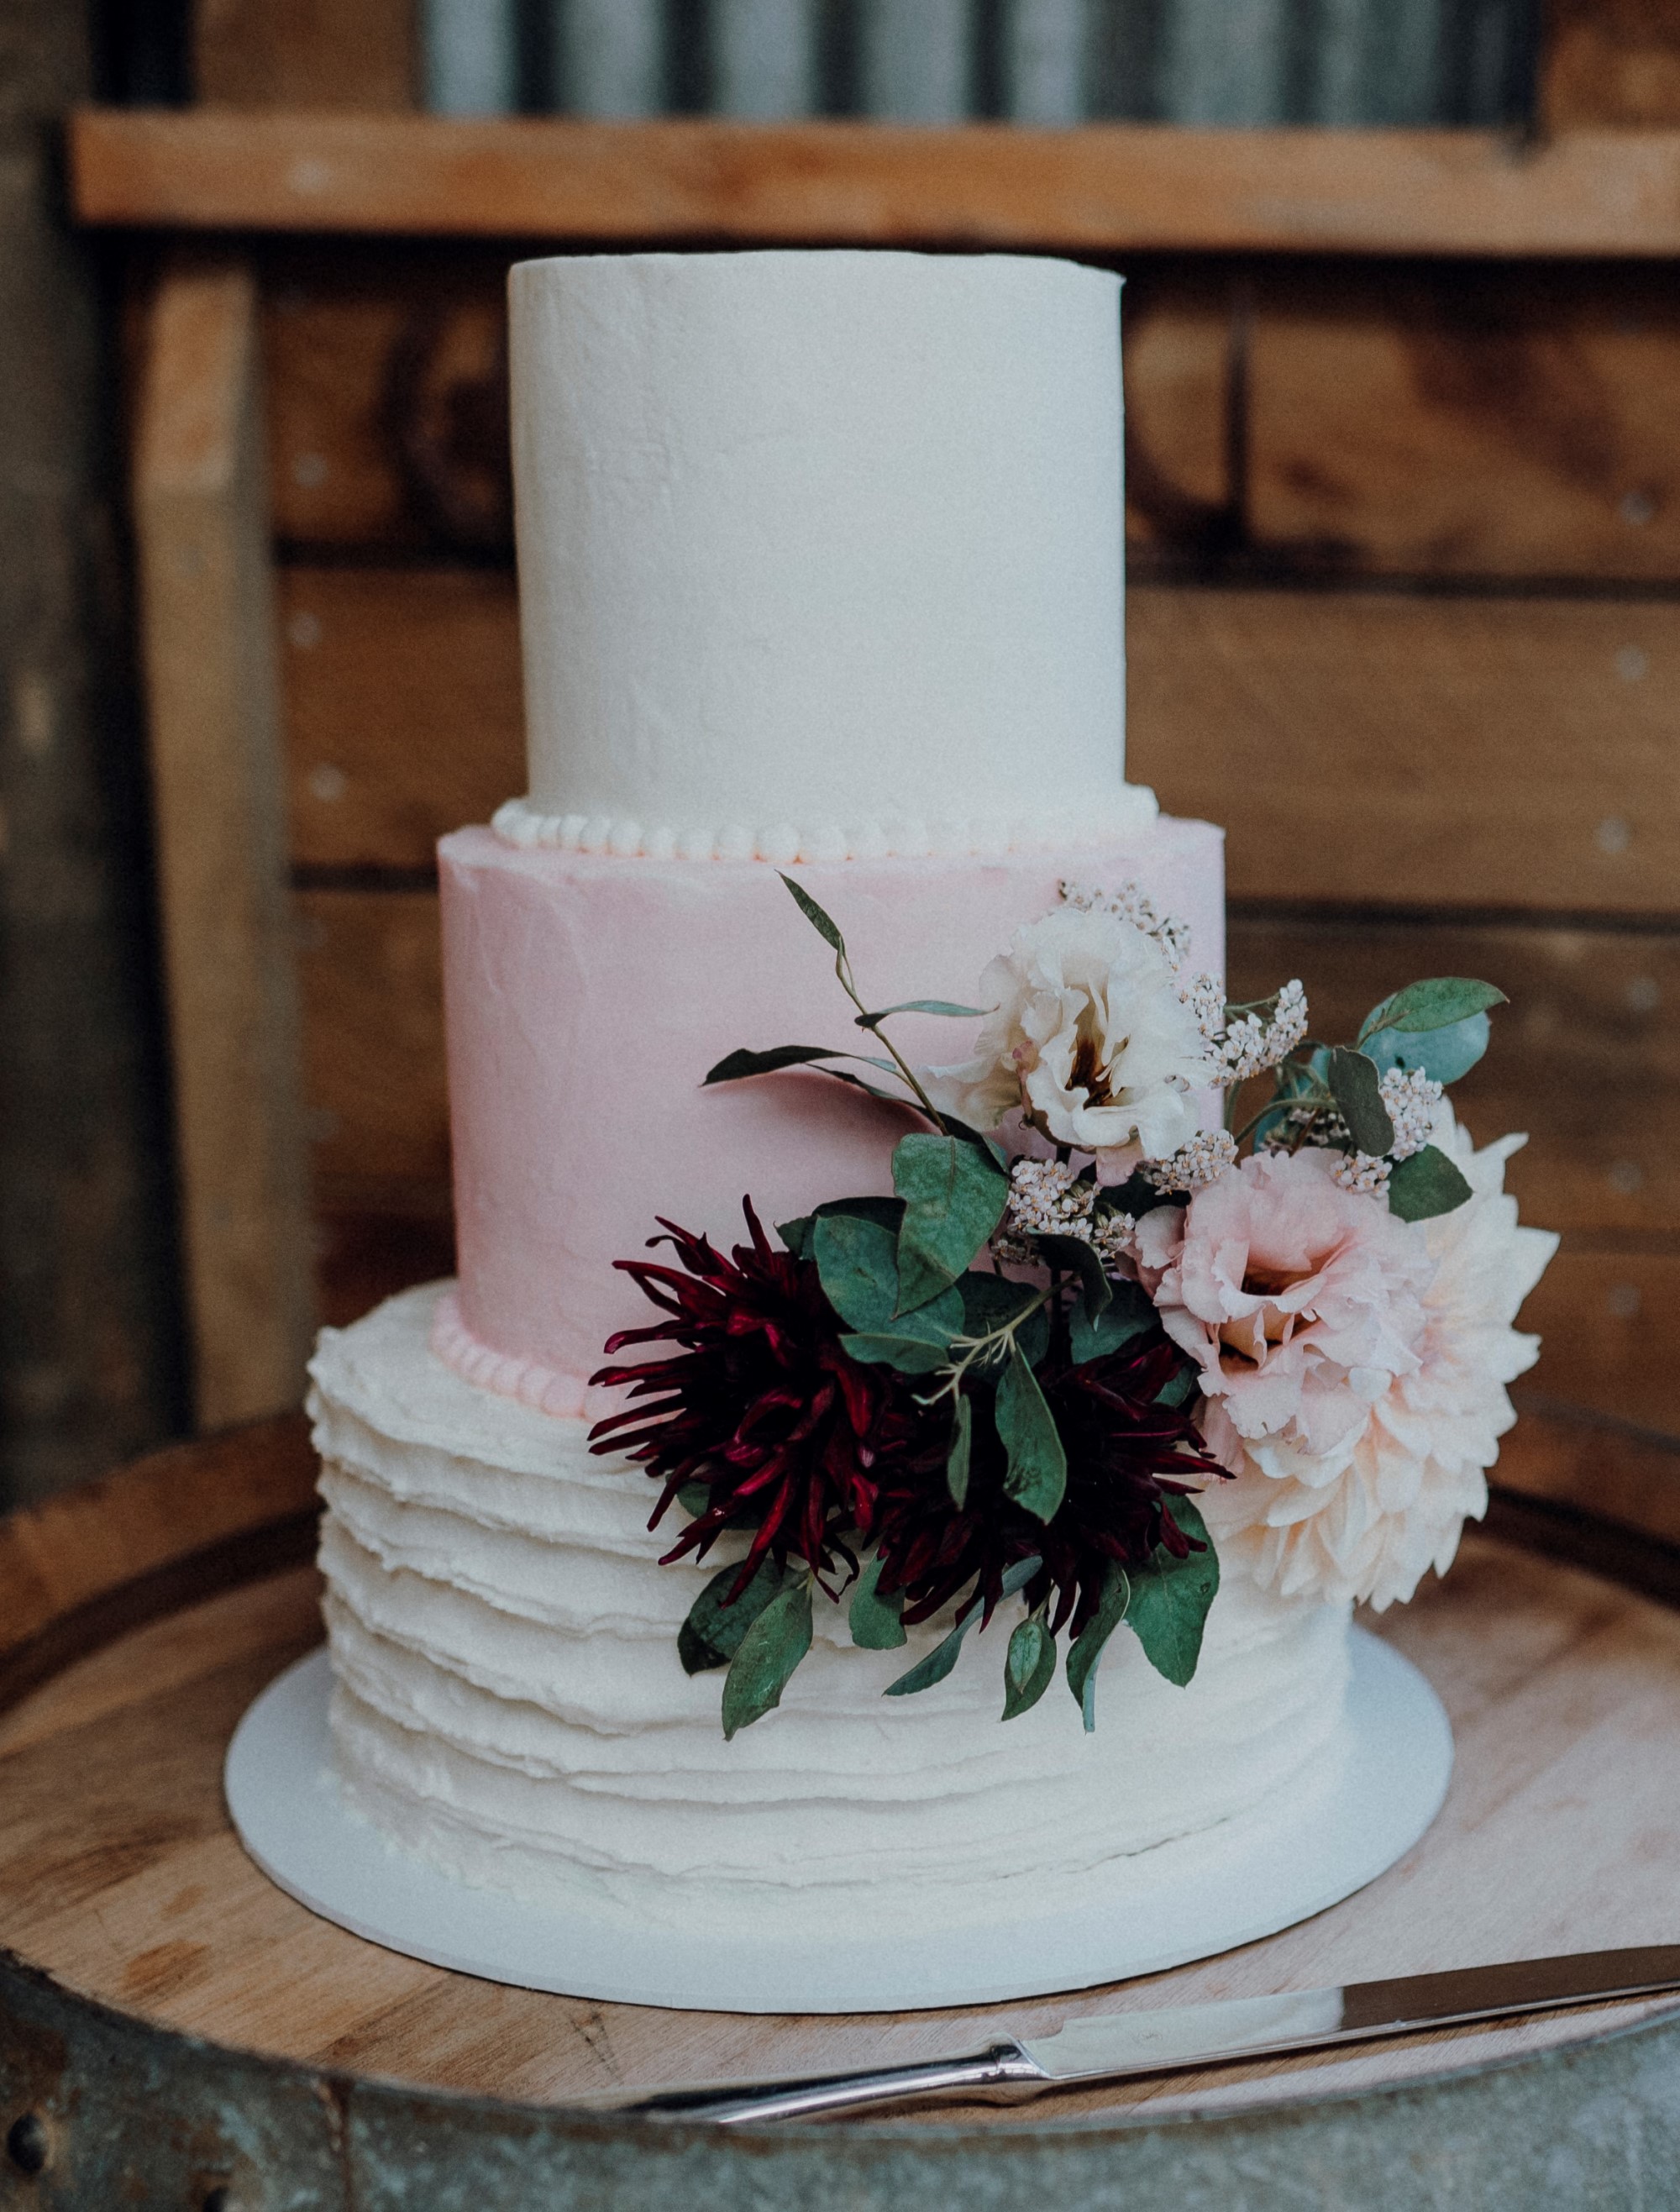 Triple tiered wedding cake with pink middle tier